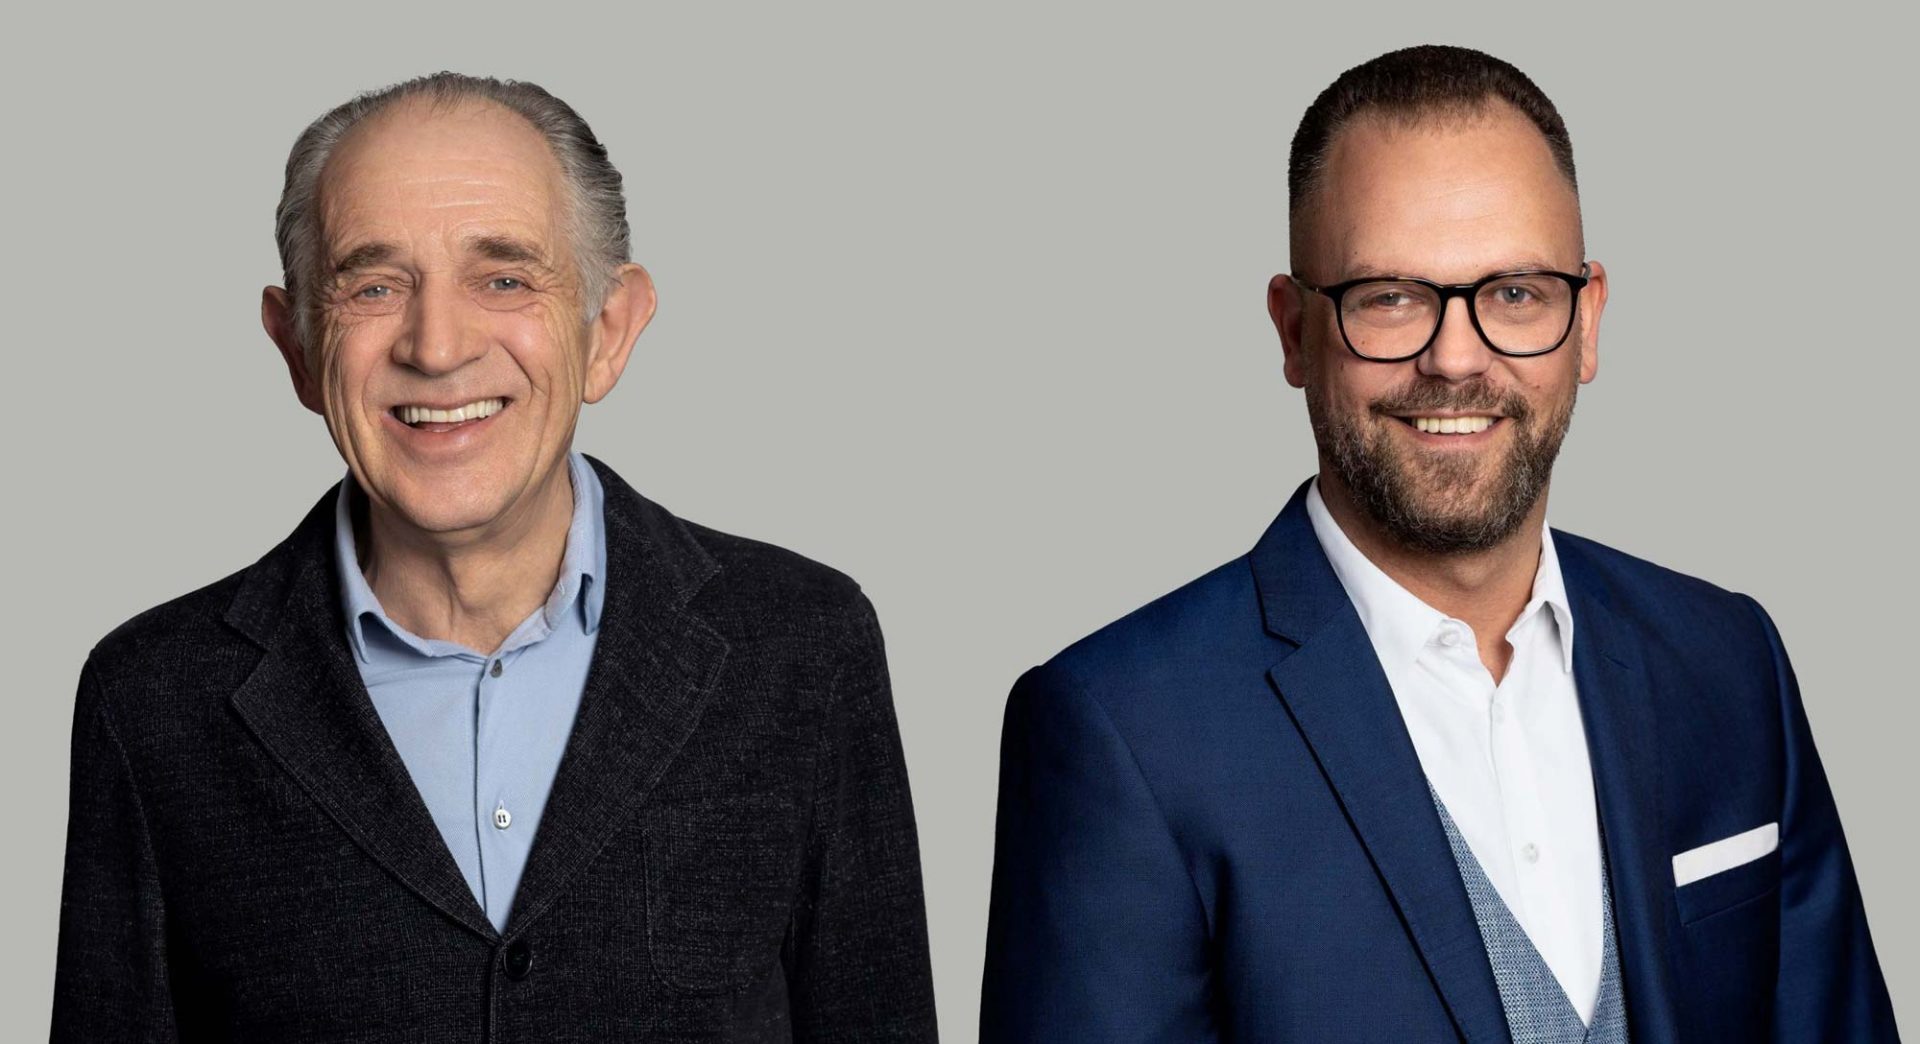 Portraits of AMR's founder Ulrich Buchholz and current Managing director Herbert Hoeckel